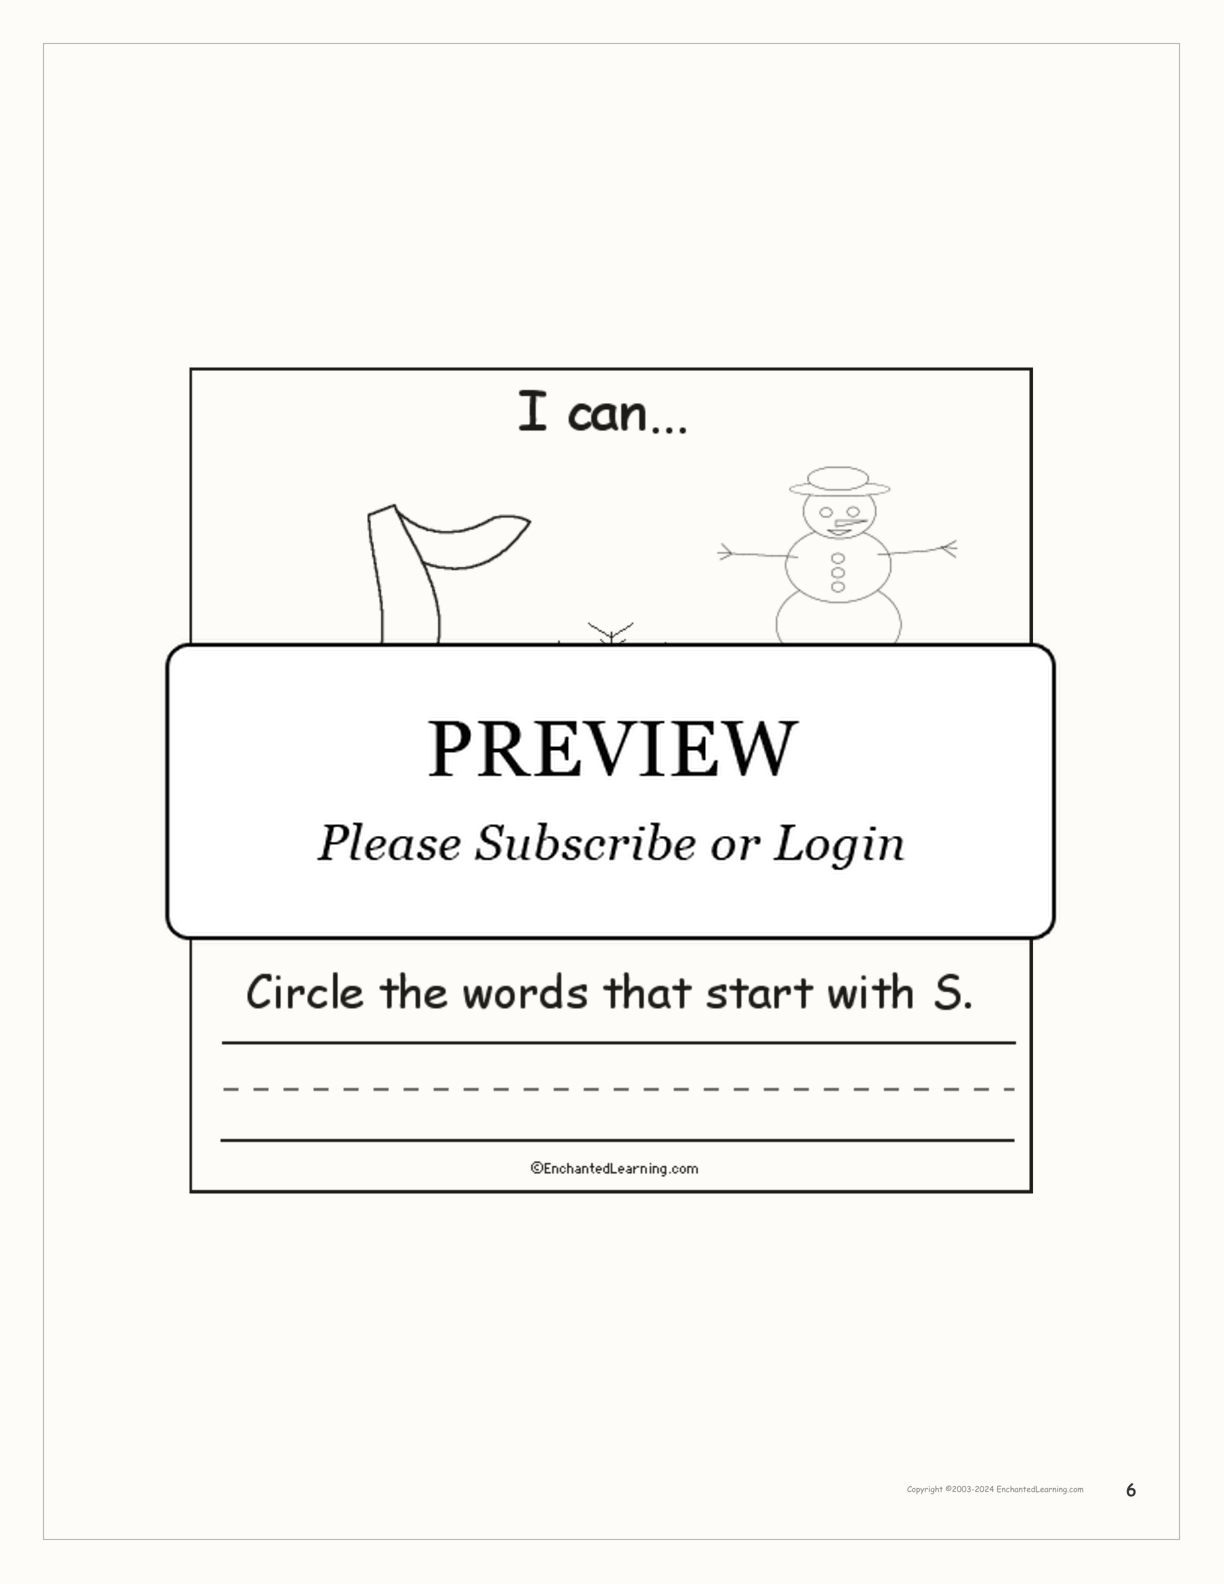 Winter I Can... Book interactive printout page 6